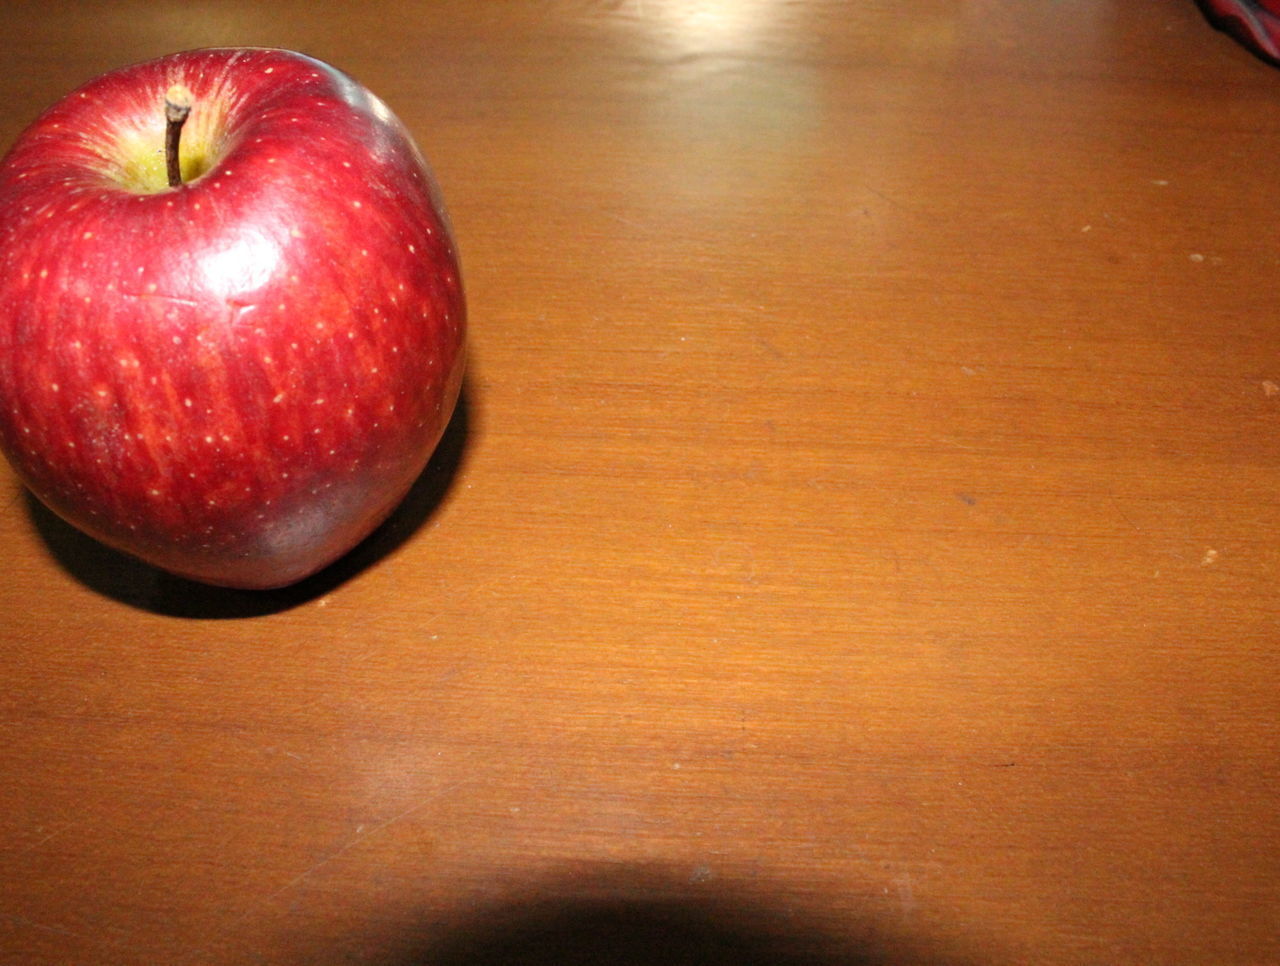 CLOSE-UP OF APPLES ON TABLE